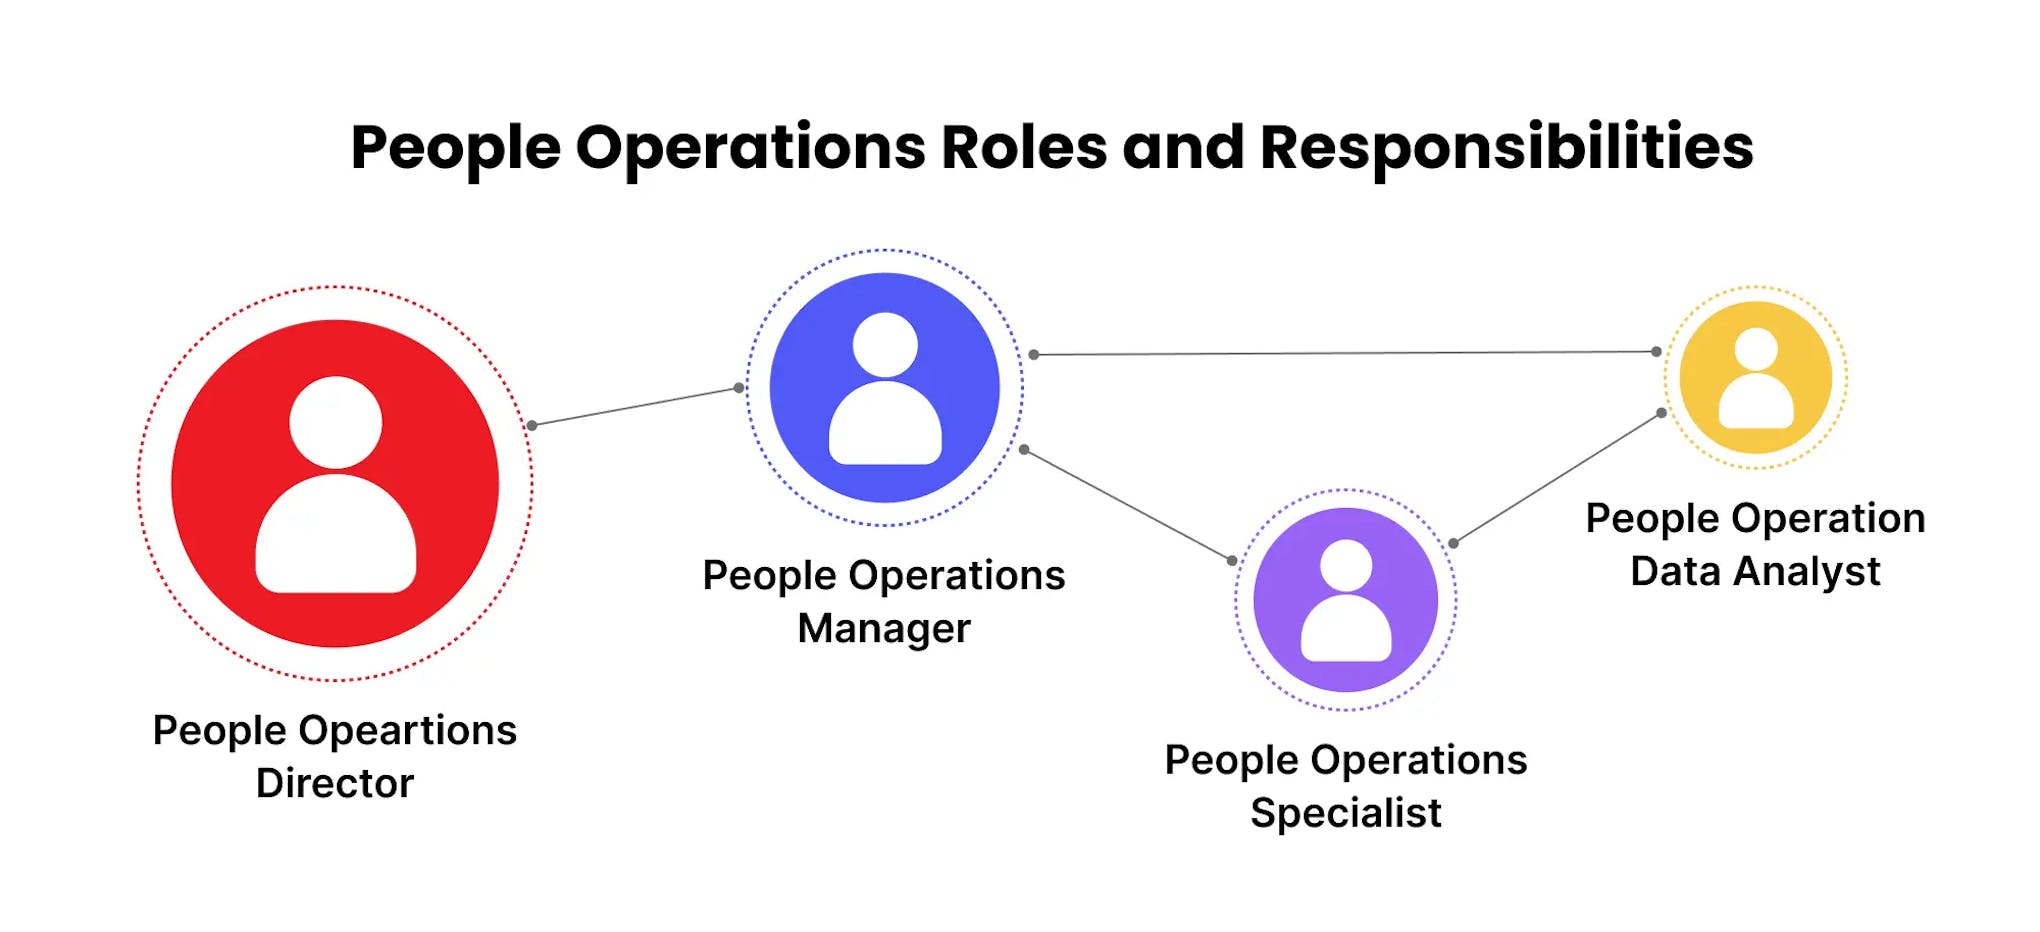 People Operations Roles and Responsibilities